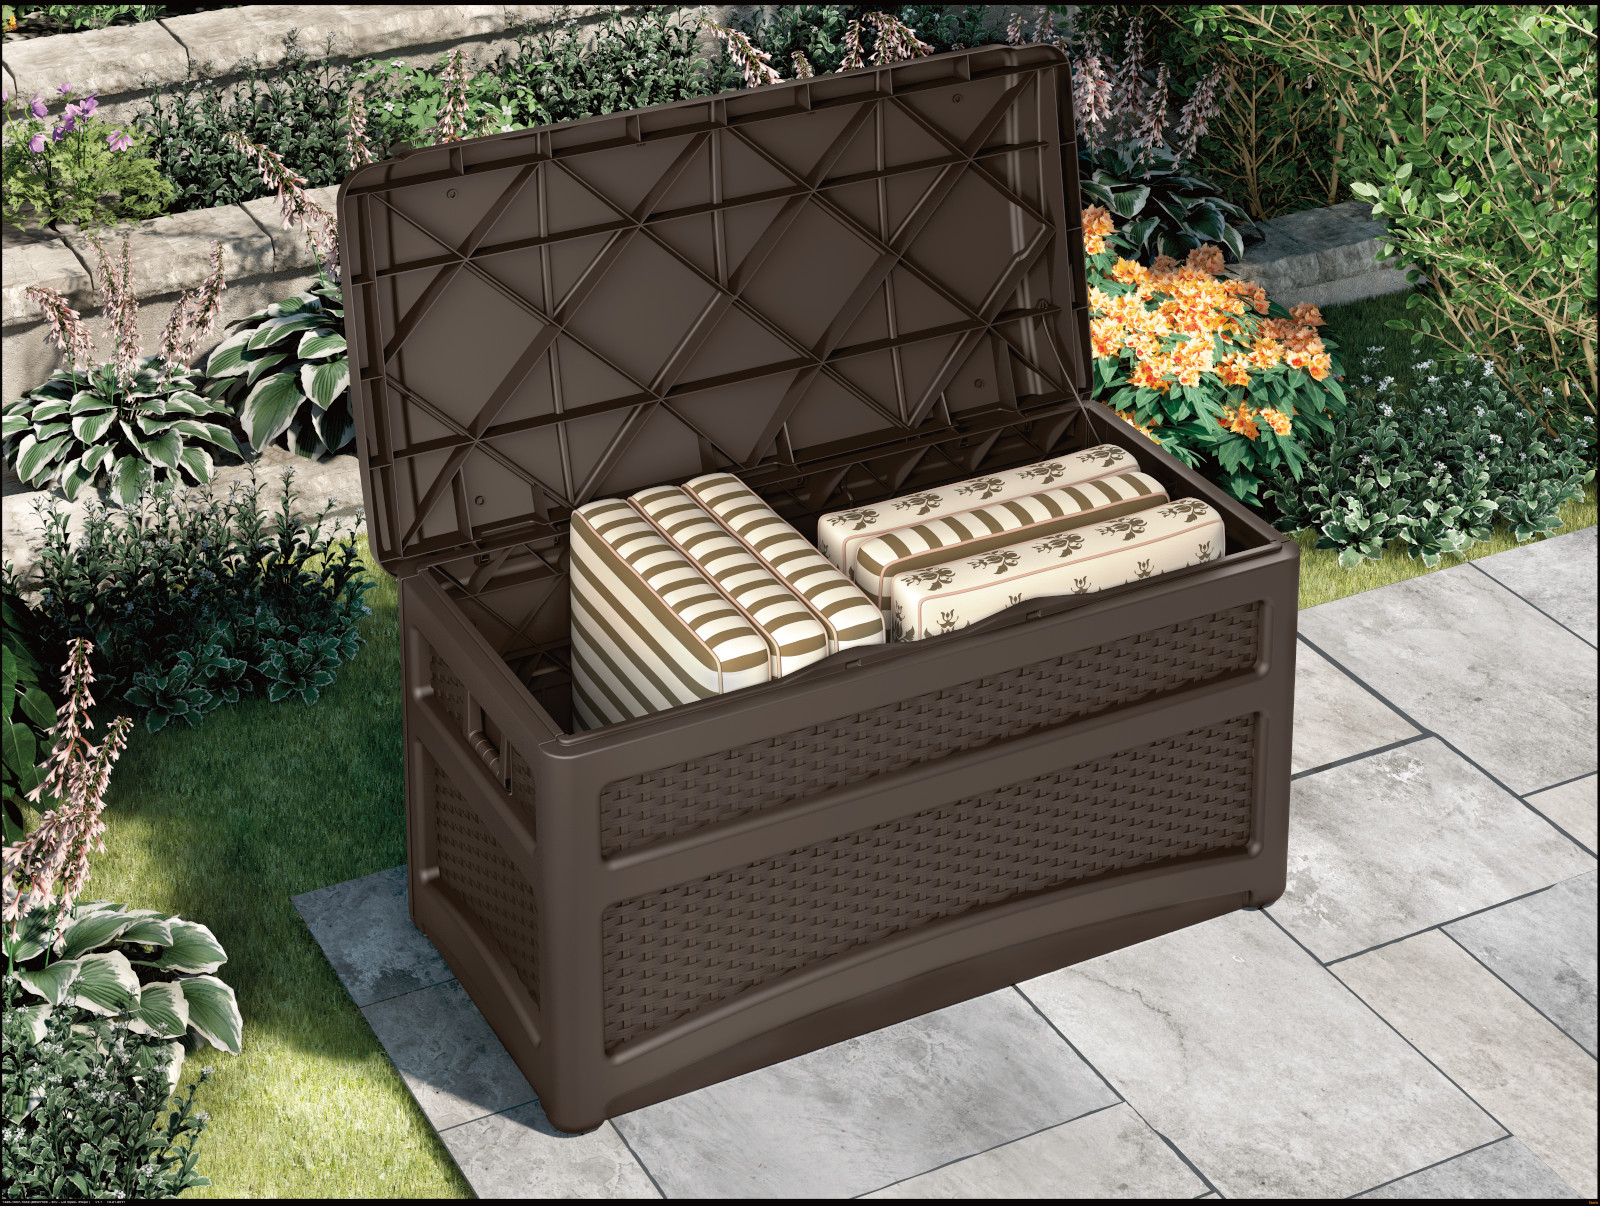 Suncast DBW7500 73 Gallon Outdoor Patio Storage Chest with Handles & Seat, Resin, Java, 39 lb, (L x W x H) 23.75 x 22.5 x 46 inches - image 6 of 7